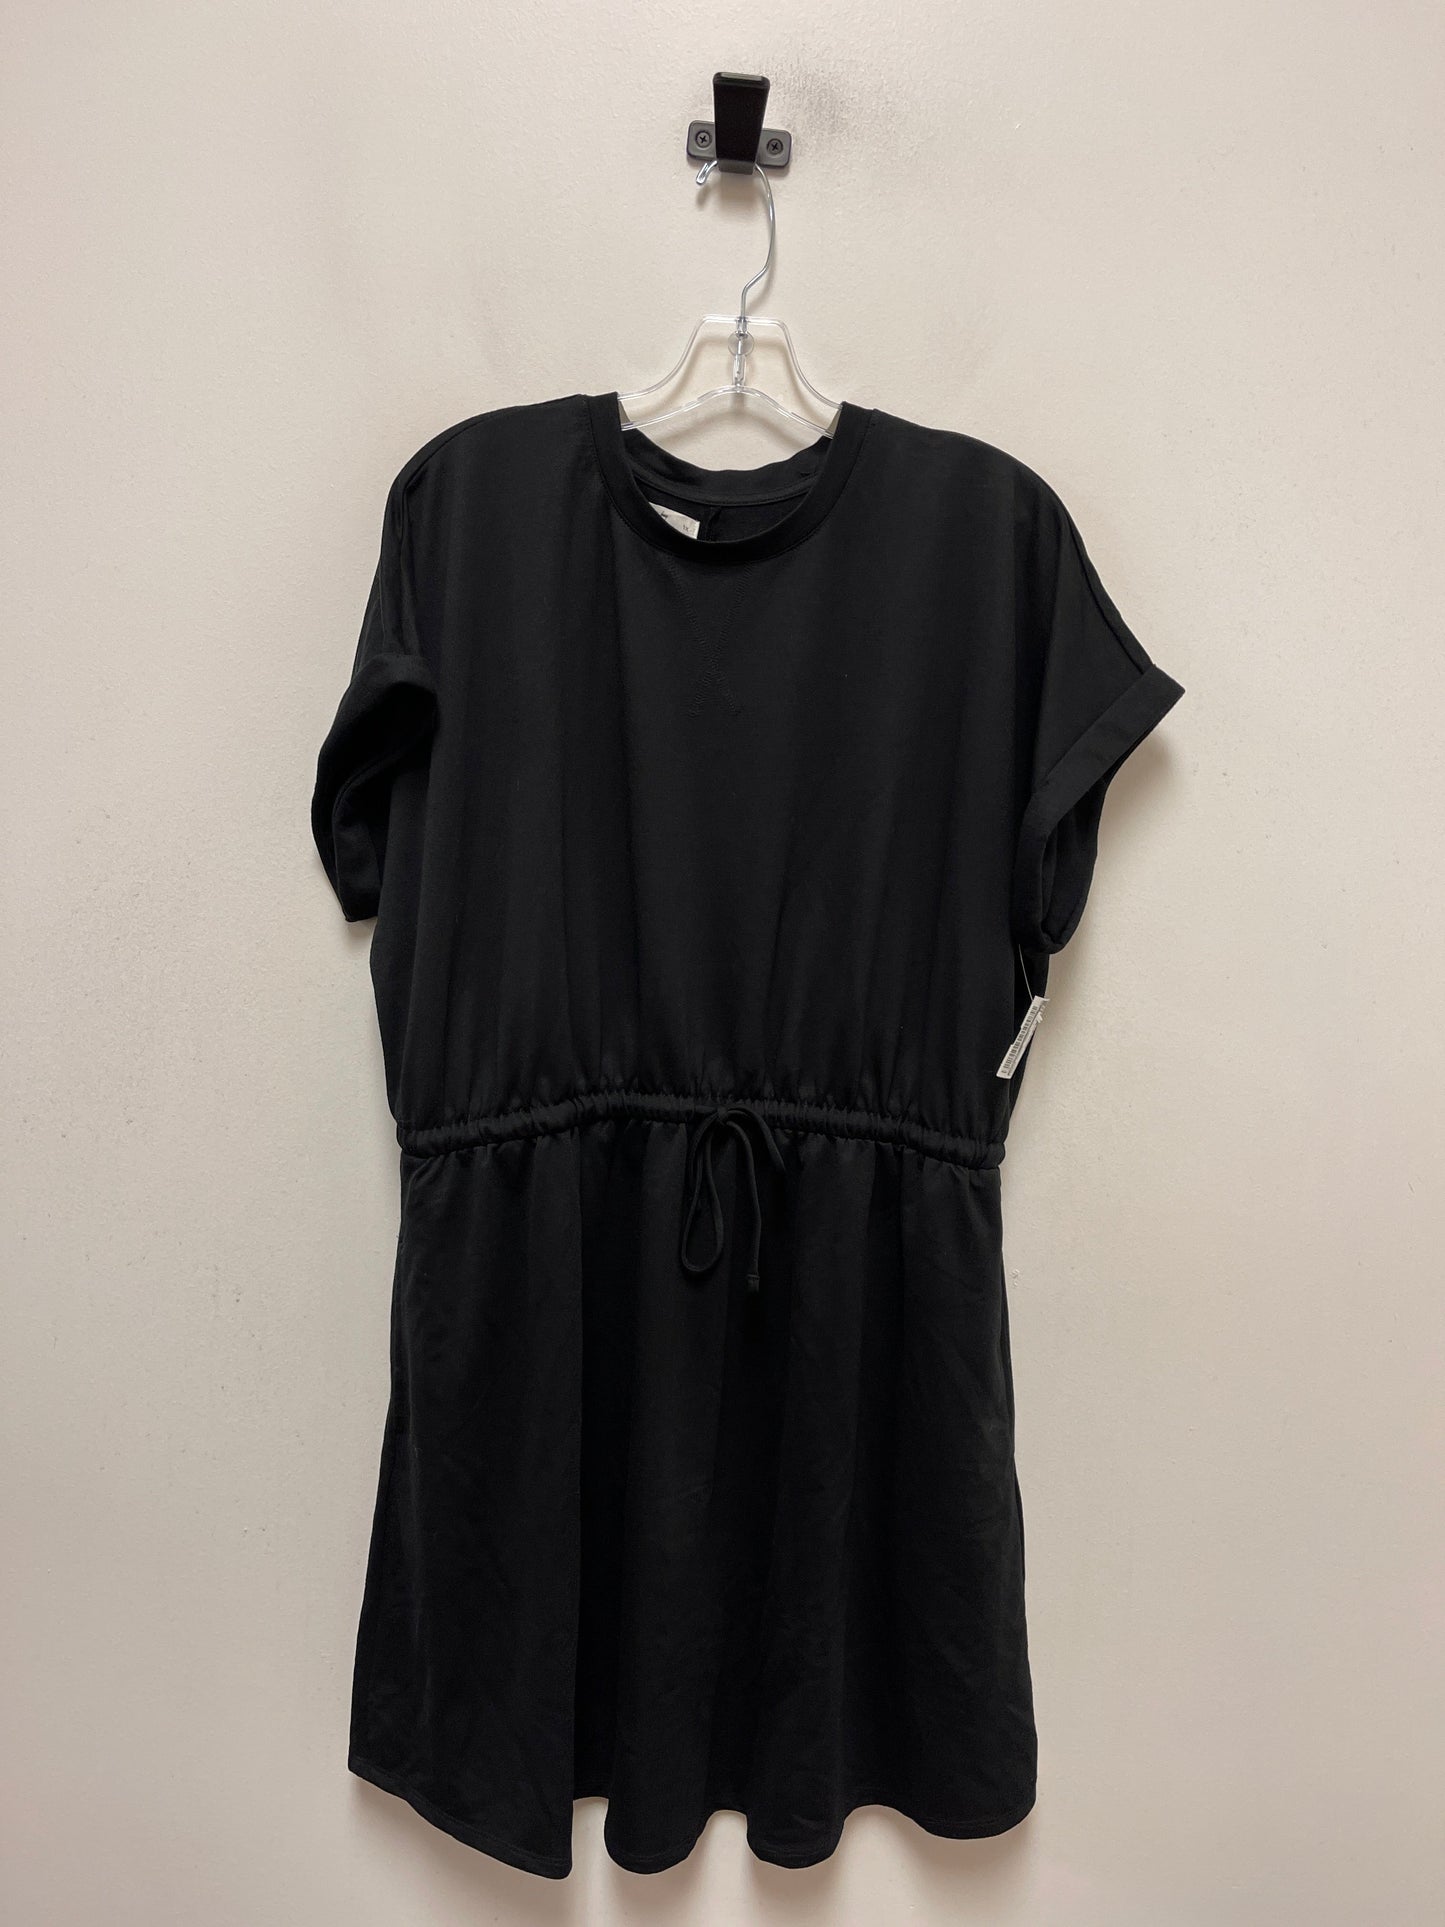 Black Dress Casual Short Maurices, Size 1x